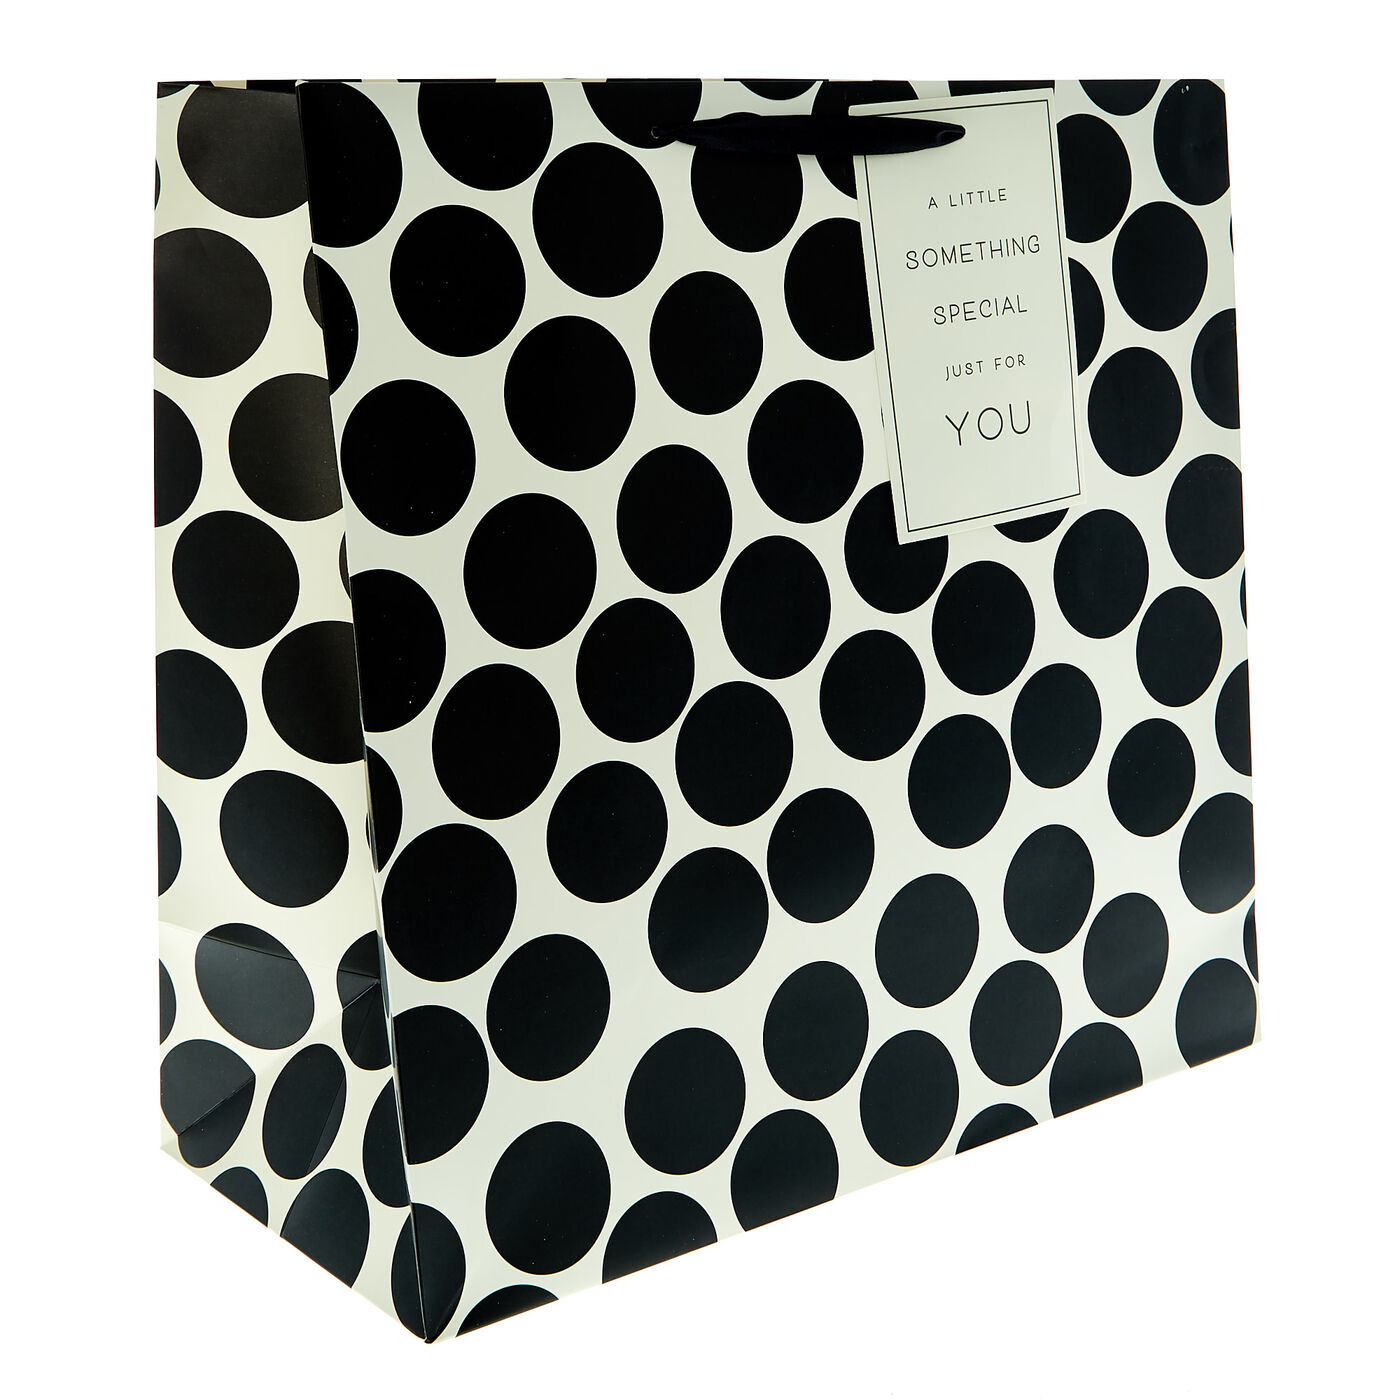 Buy Extra Large Square Gift Bag - Black Spots Something Special for GBP ...